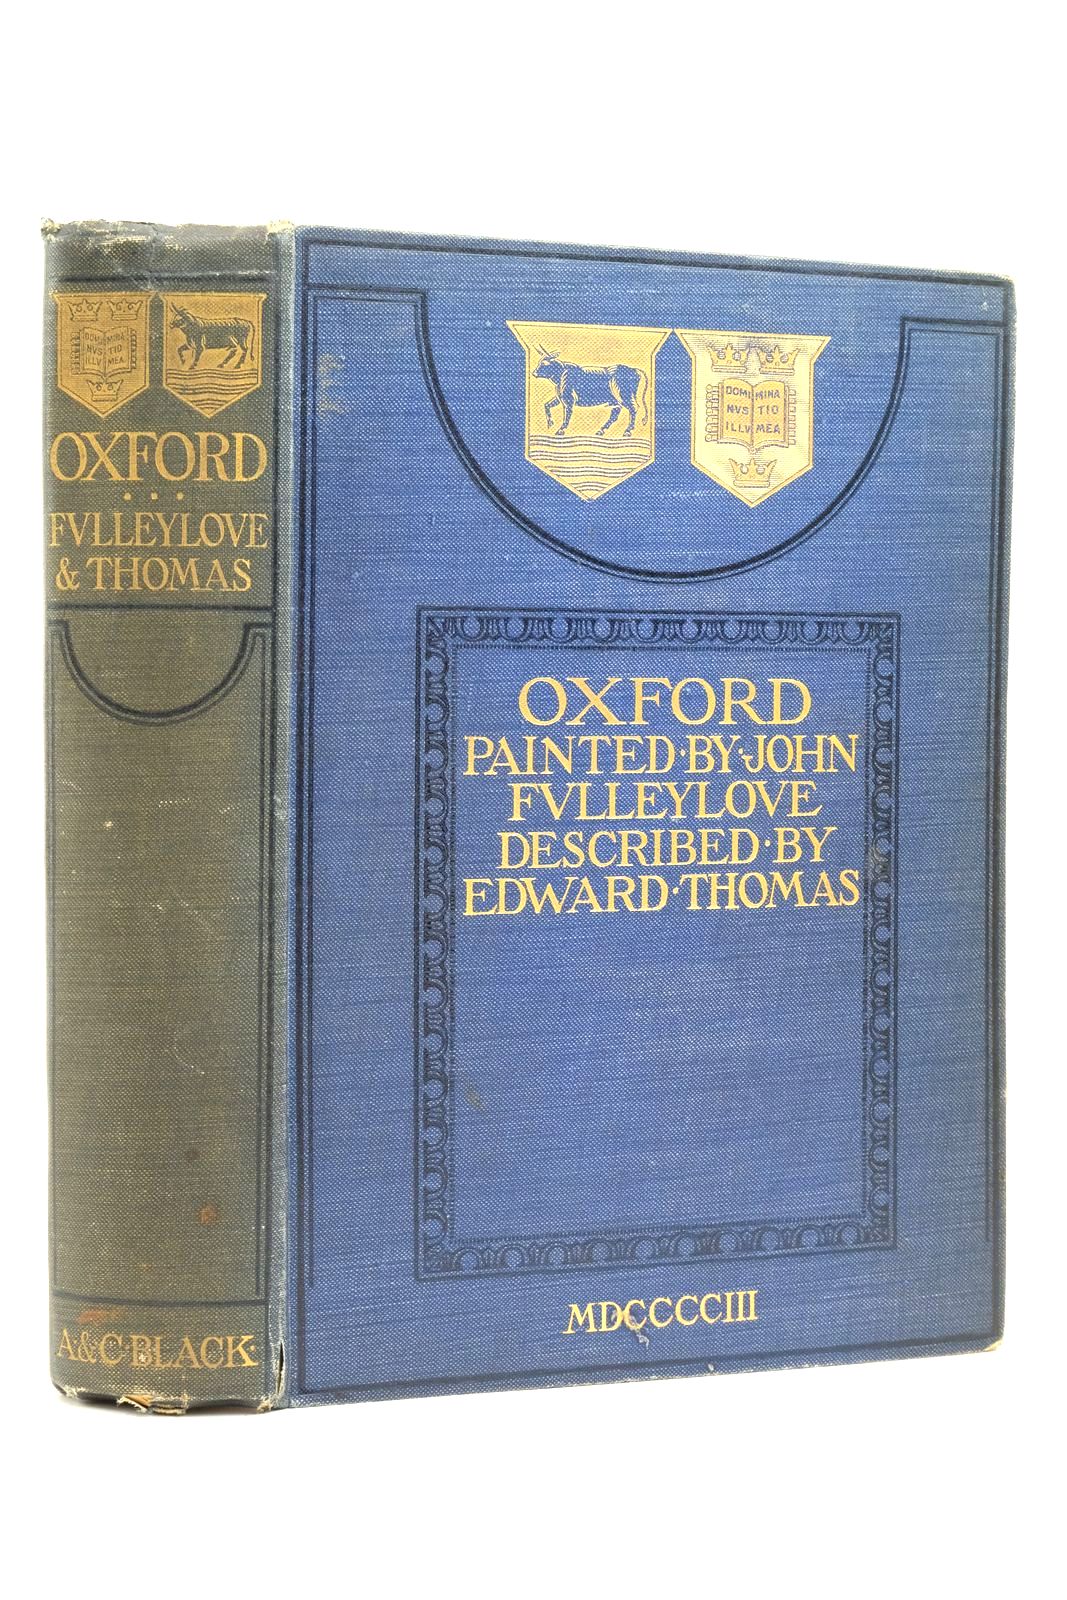 Photo of OXFORD written by Thomas, Edward illustrated by Fulleylove, John published by A. & C. Black (STOCK CODE: 2137587)  for sale by Stella & Rose's Books